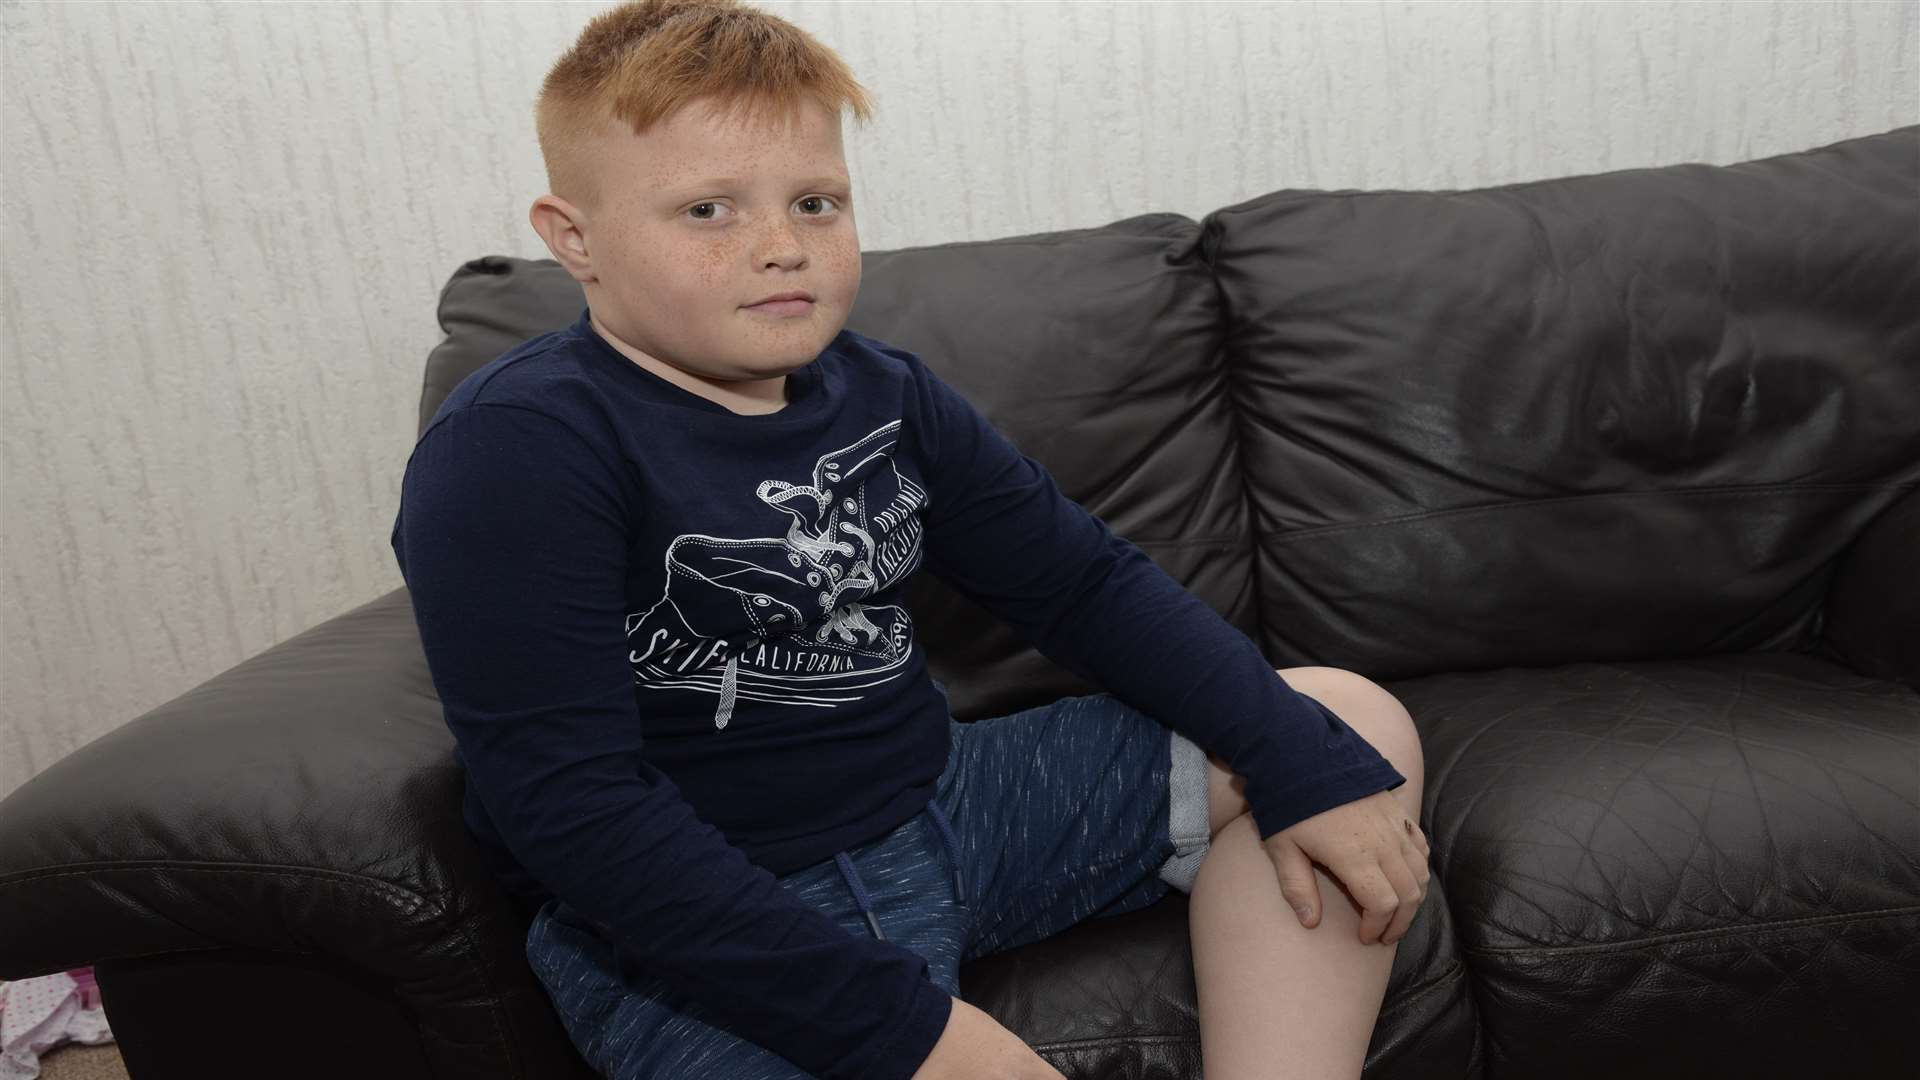 Eleven-year-old Harvey Cowpland who was injured when he was knocked off a bike in a hit and run